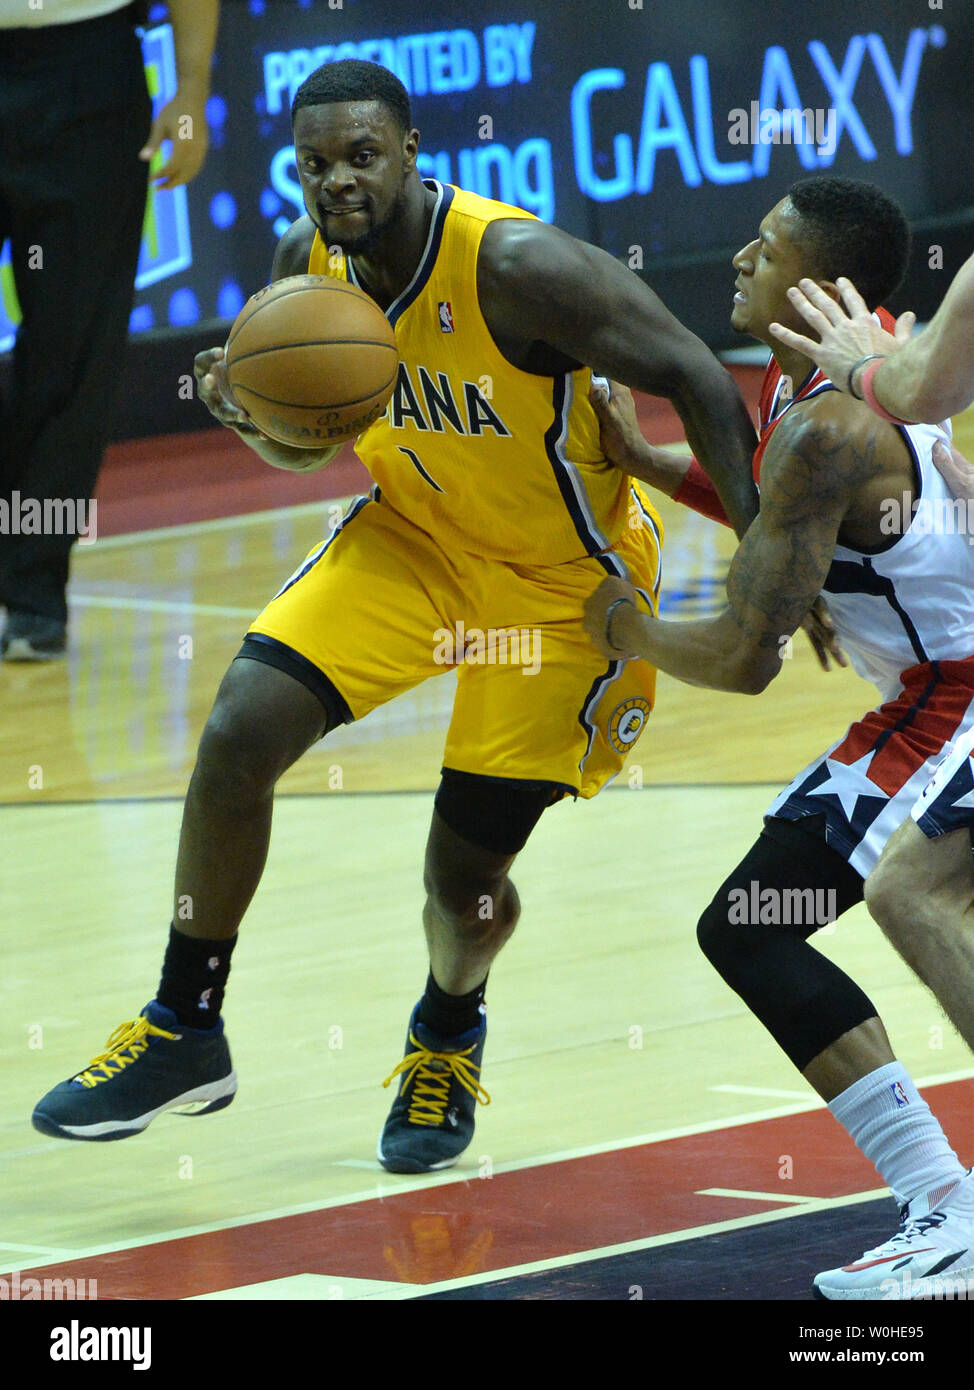 Indiana Pacers guard Lance Stephenson (1) drives to the basket against Washington Wizards guard Bradley Beal (3) during the 1st half of game six of the Eastern Conference Semifinals at the Verizon Center in Washington, D.C. on May 15, 2014. UPI/Kevin Dietsch Stock Photo